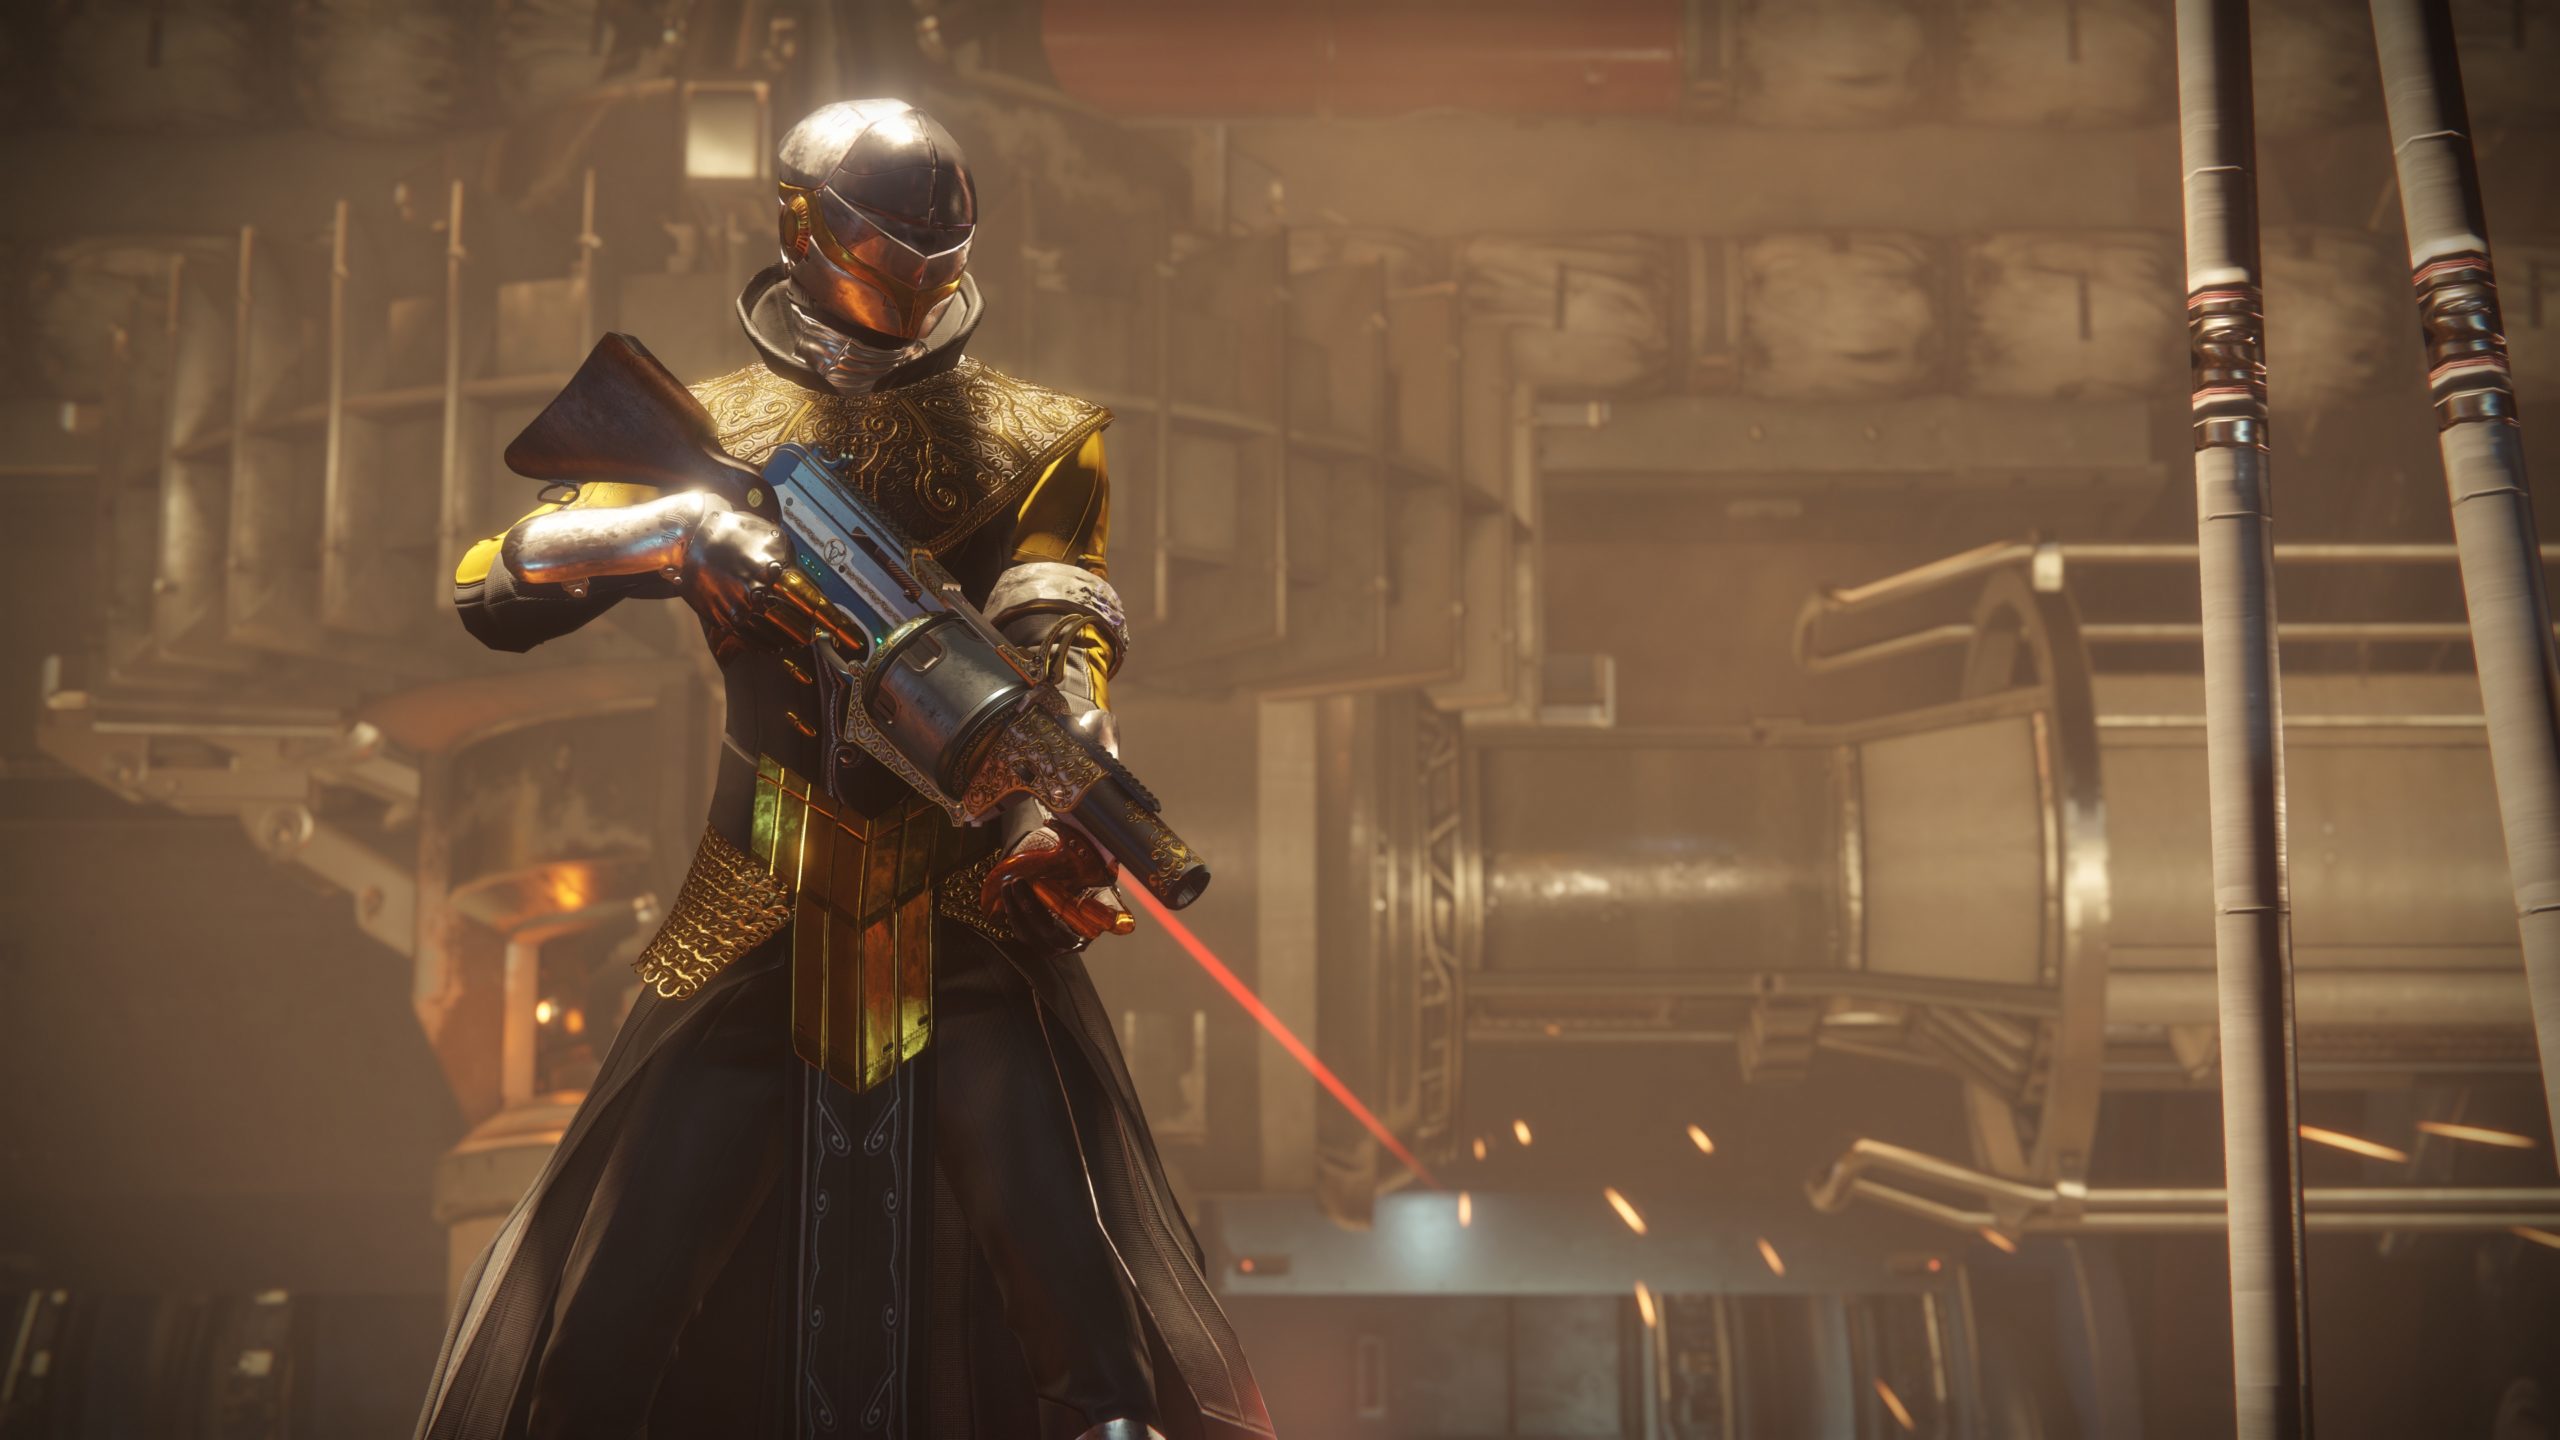 Yes, The Destiny 2 Twitch Prime Loot Works With Stadia